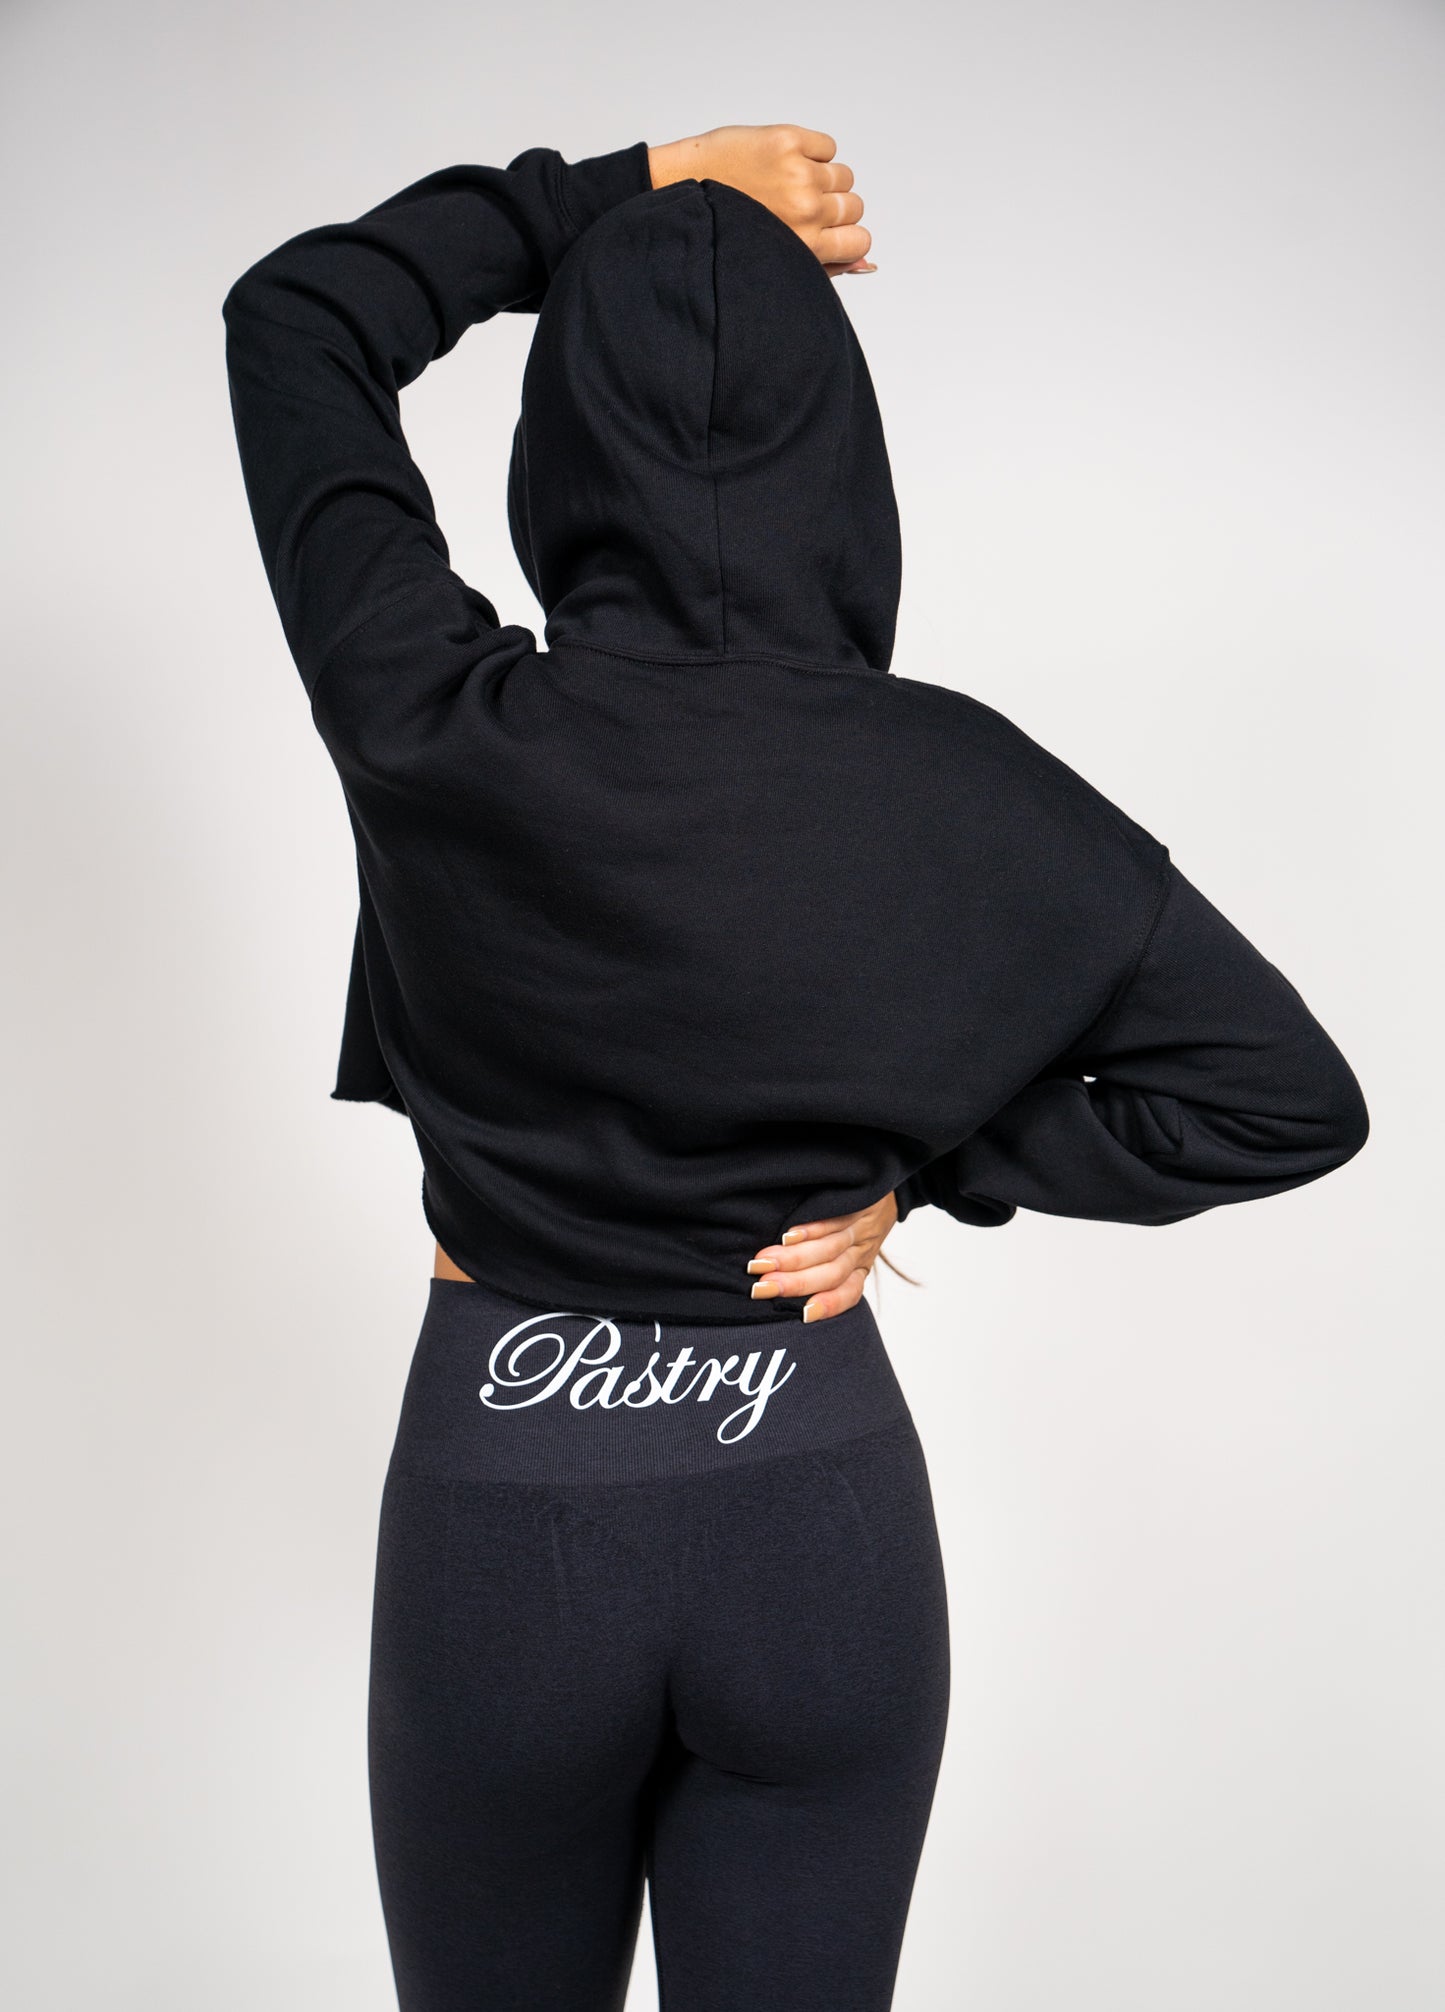 Woman wearing Pastry Cropped Hoodie Black with Neon Green Logo back view